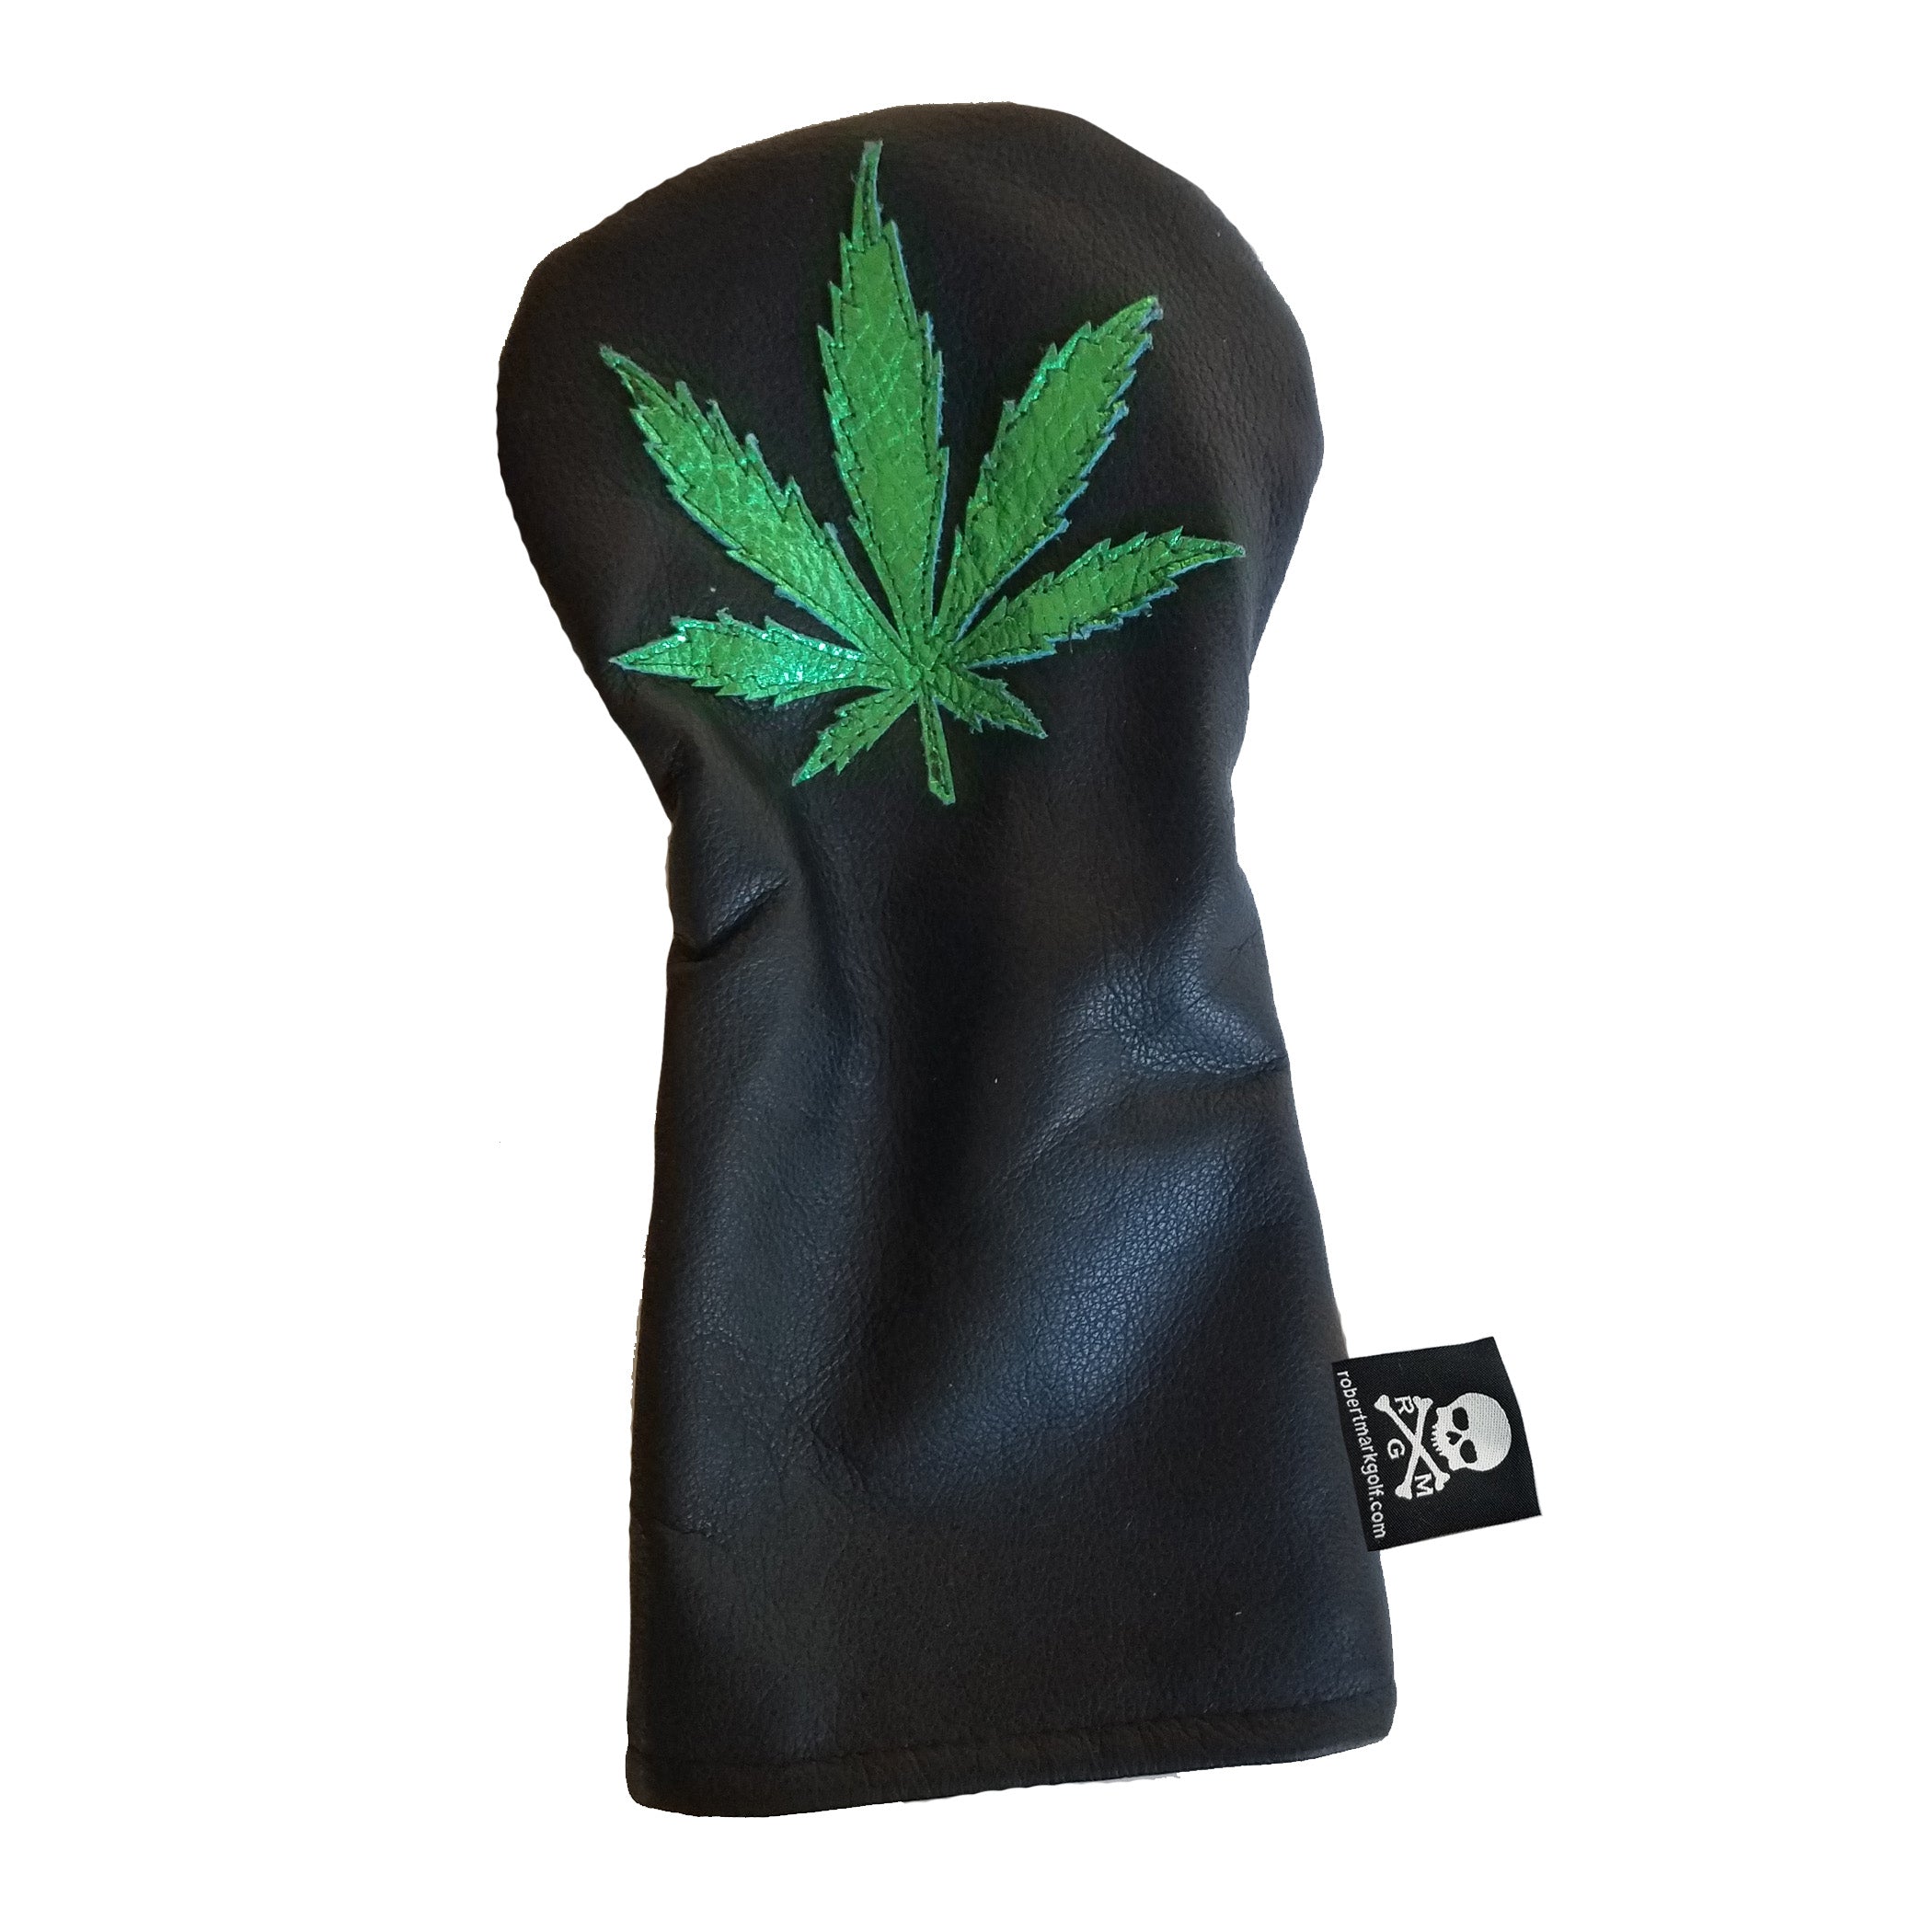 Limited Edition! The "420" Headcover - Robert Mark Golf